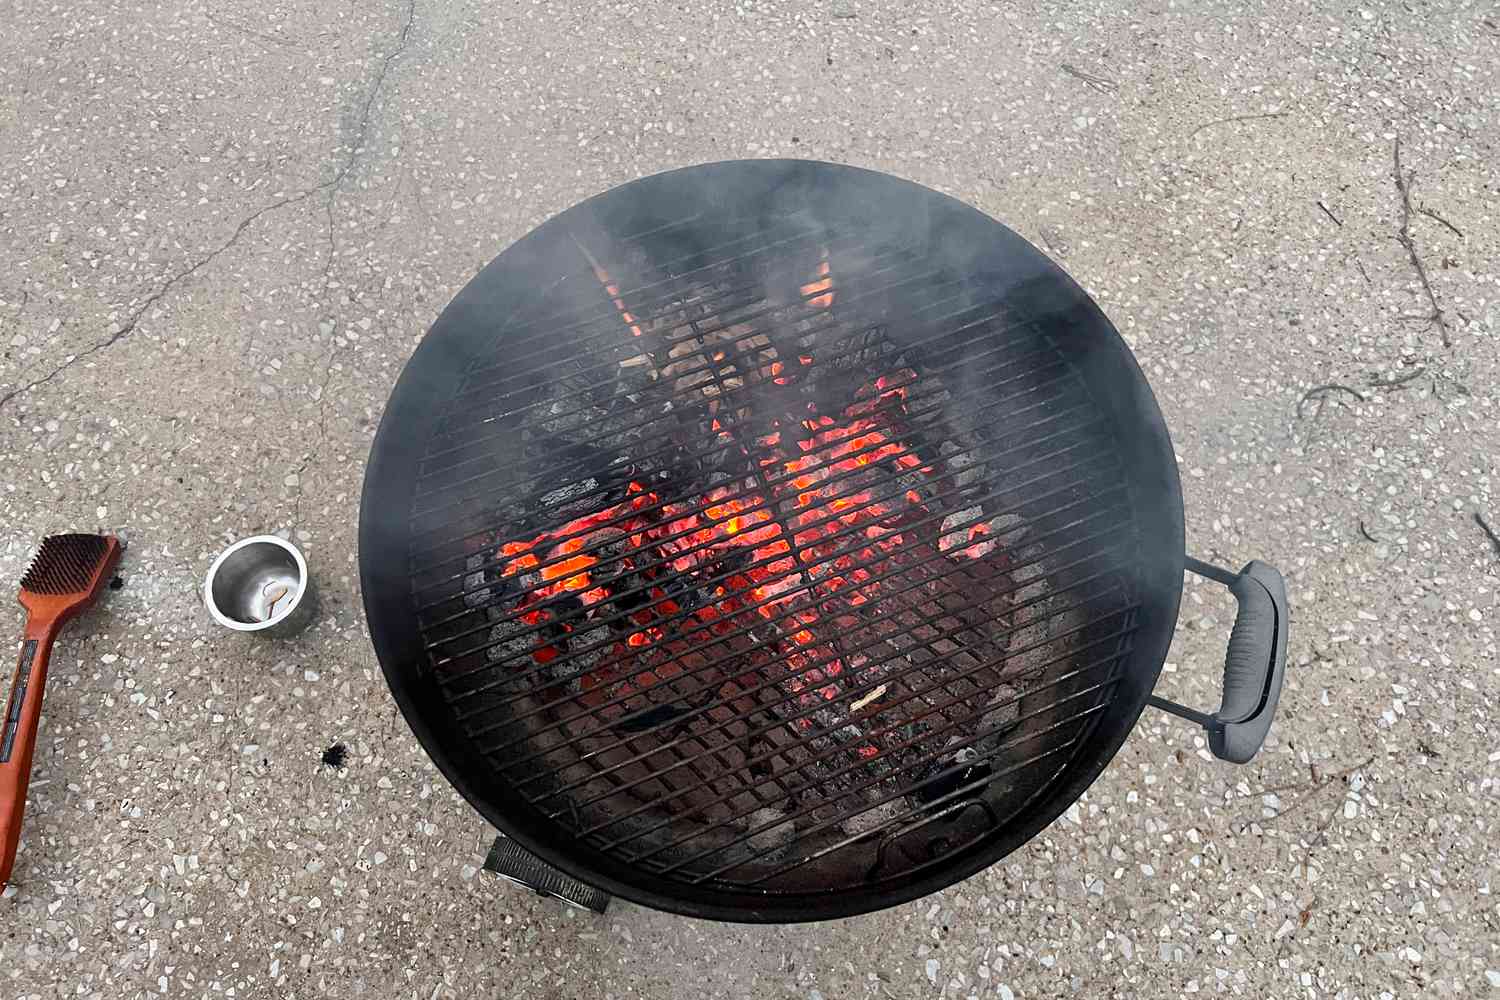 Masterbuilt Lump Charcoal burning in a grill 